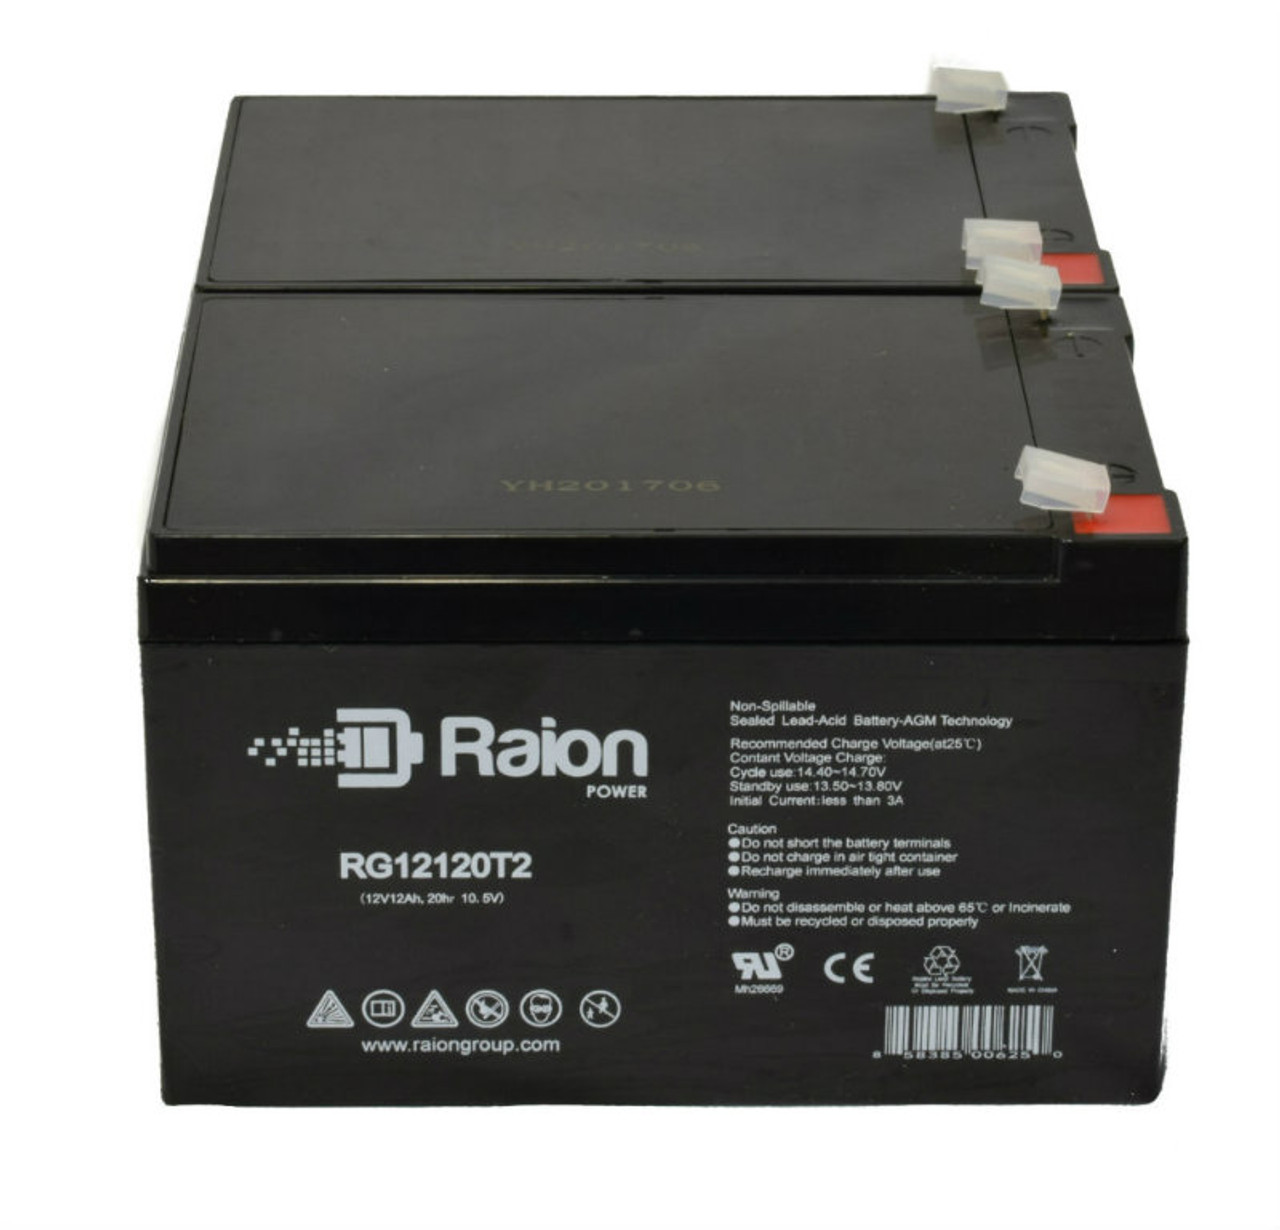 Raion Power 12V 12Ah Non-Spillable Compatible Replacement Battery for Weida HX12-10 - (2 Pack)